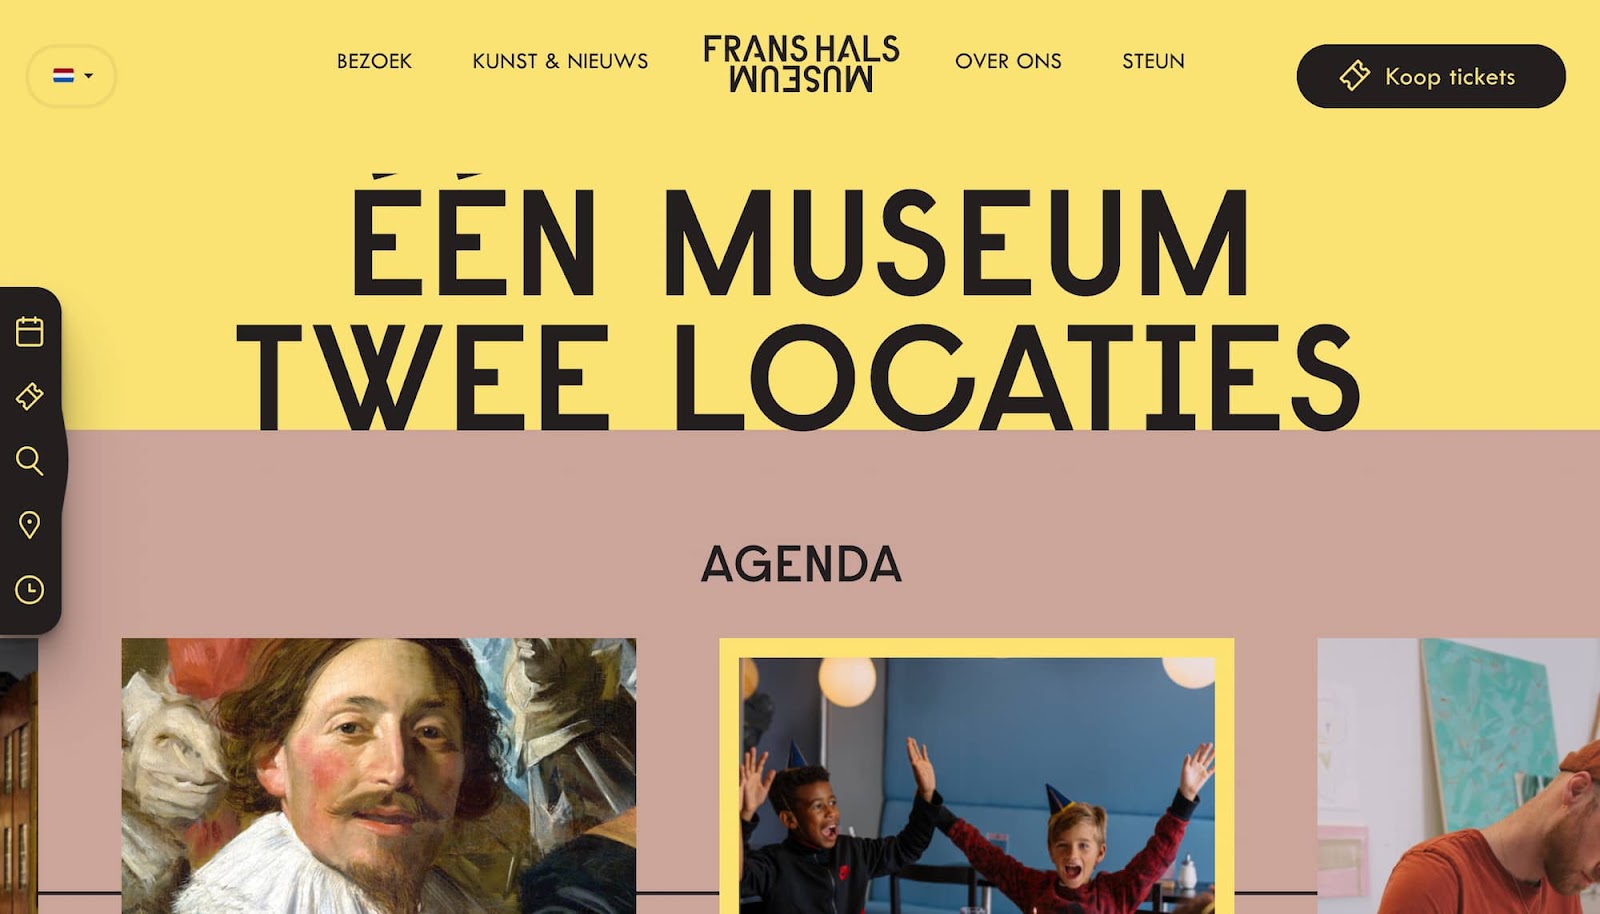 homepage for the museum website the frans hals museum